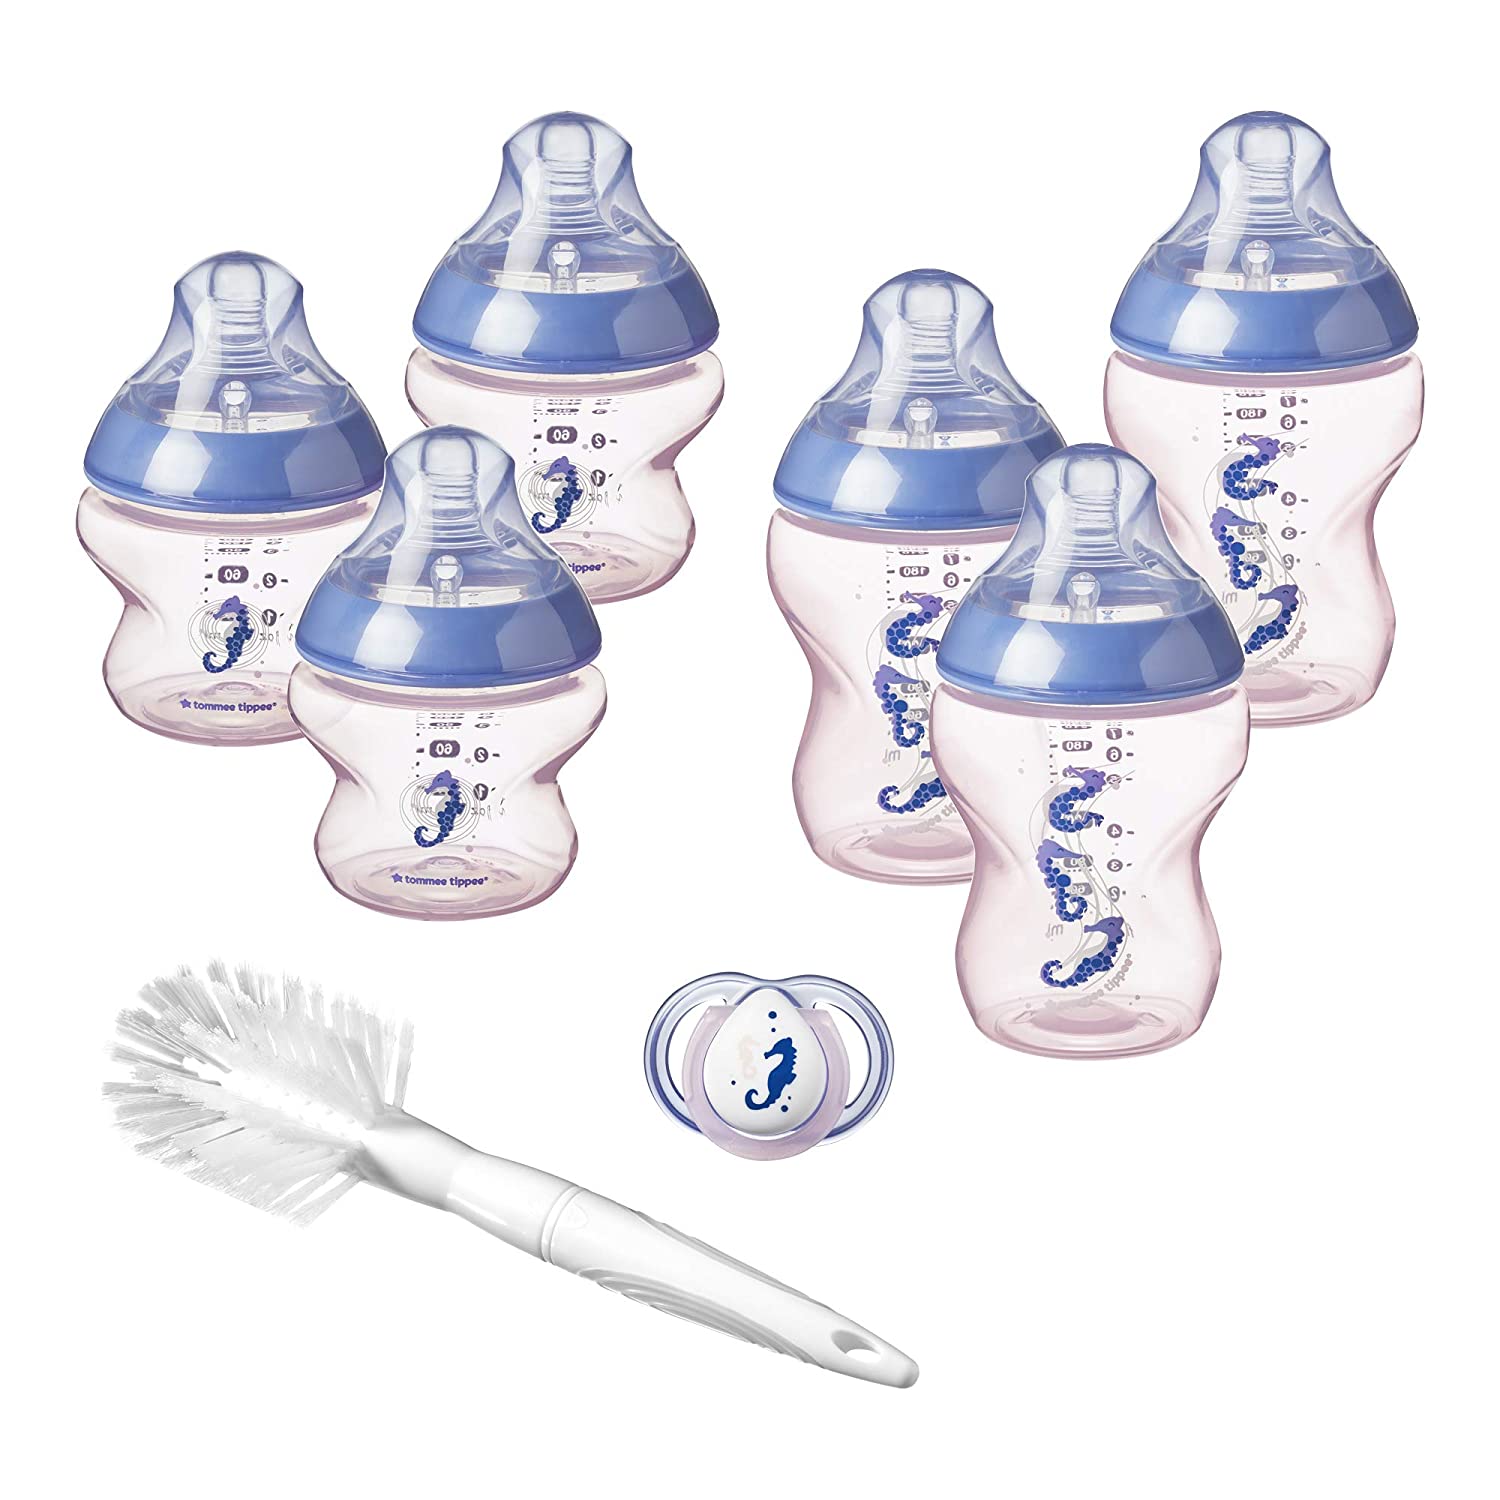 Tommee Tippee Closer to Nature Baby Bottle Set for Newborn, Anti-Colic Valve, Soft Teat, Pink with Decorations